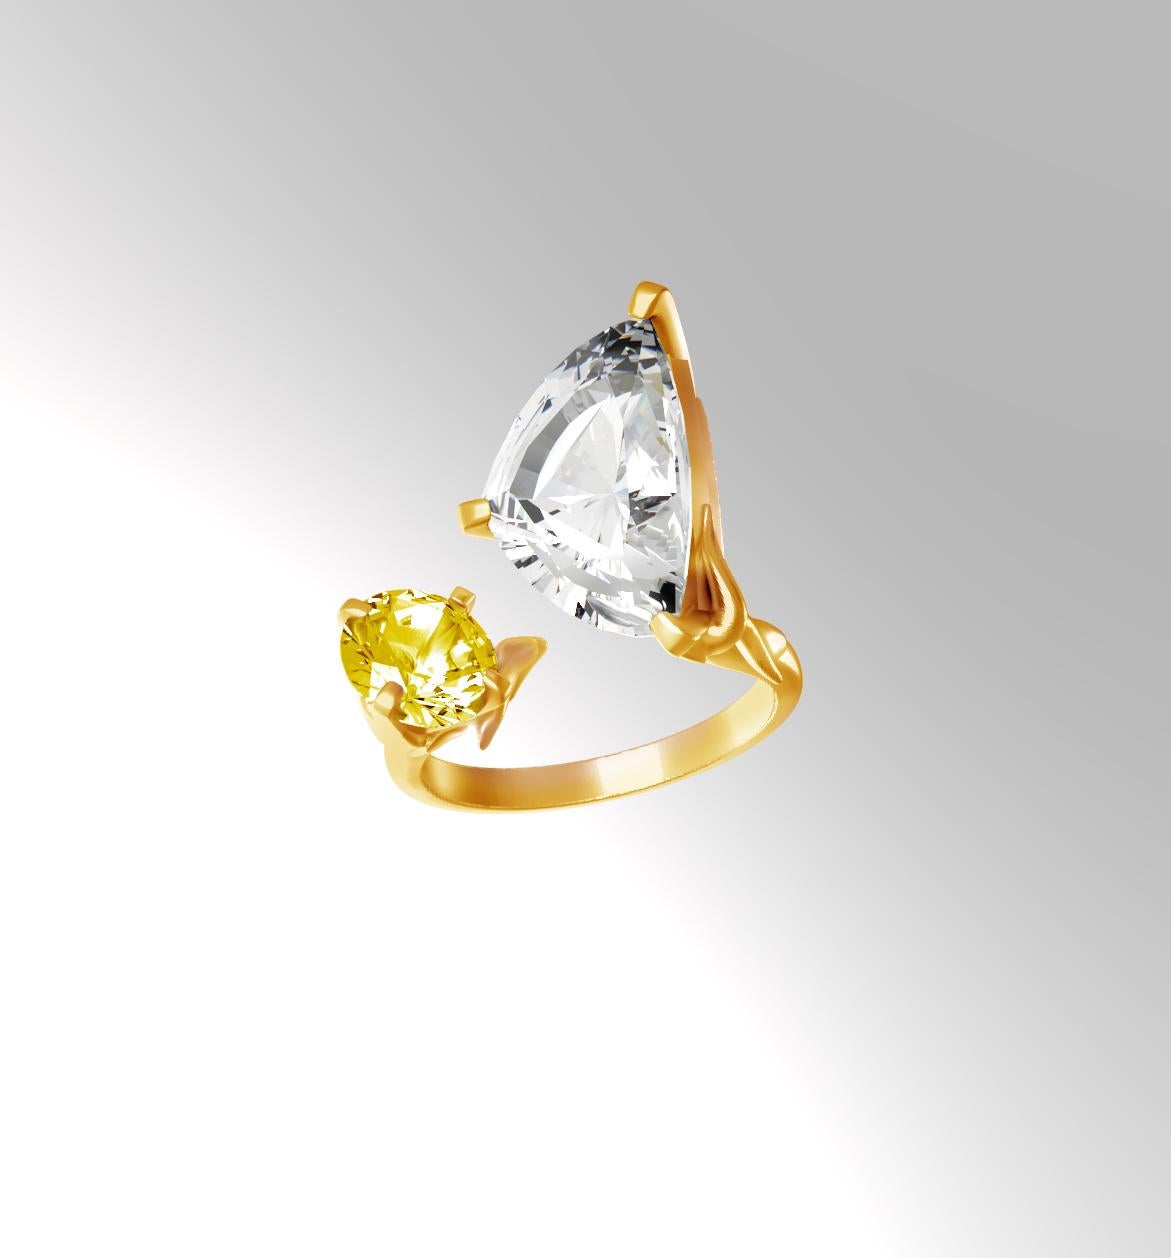 Contemporary Ring in Eighteen Karat Yellow Gold with White Paraiba Tourmaline For Sale 1